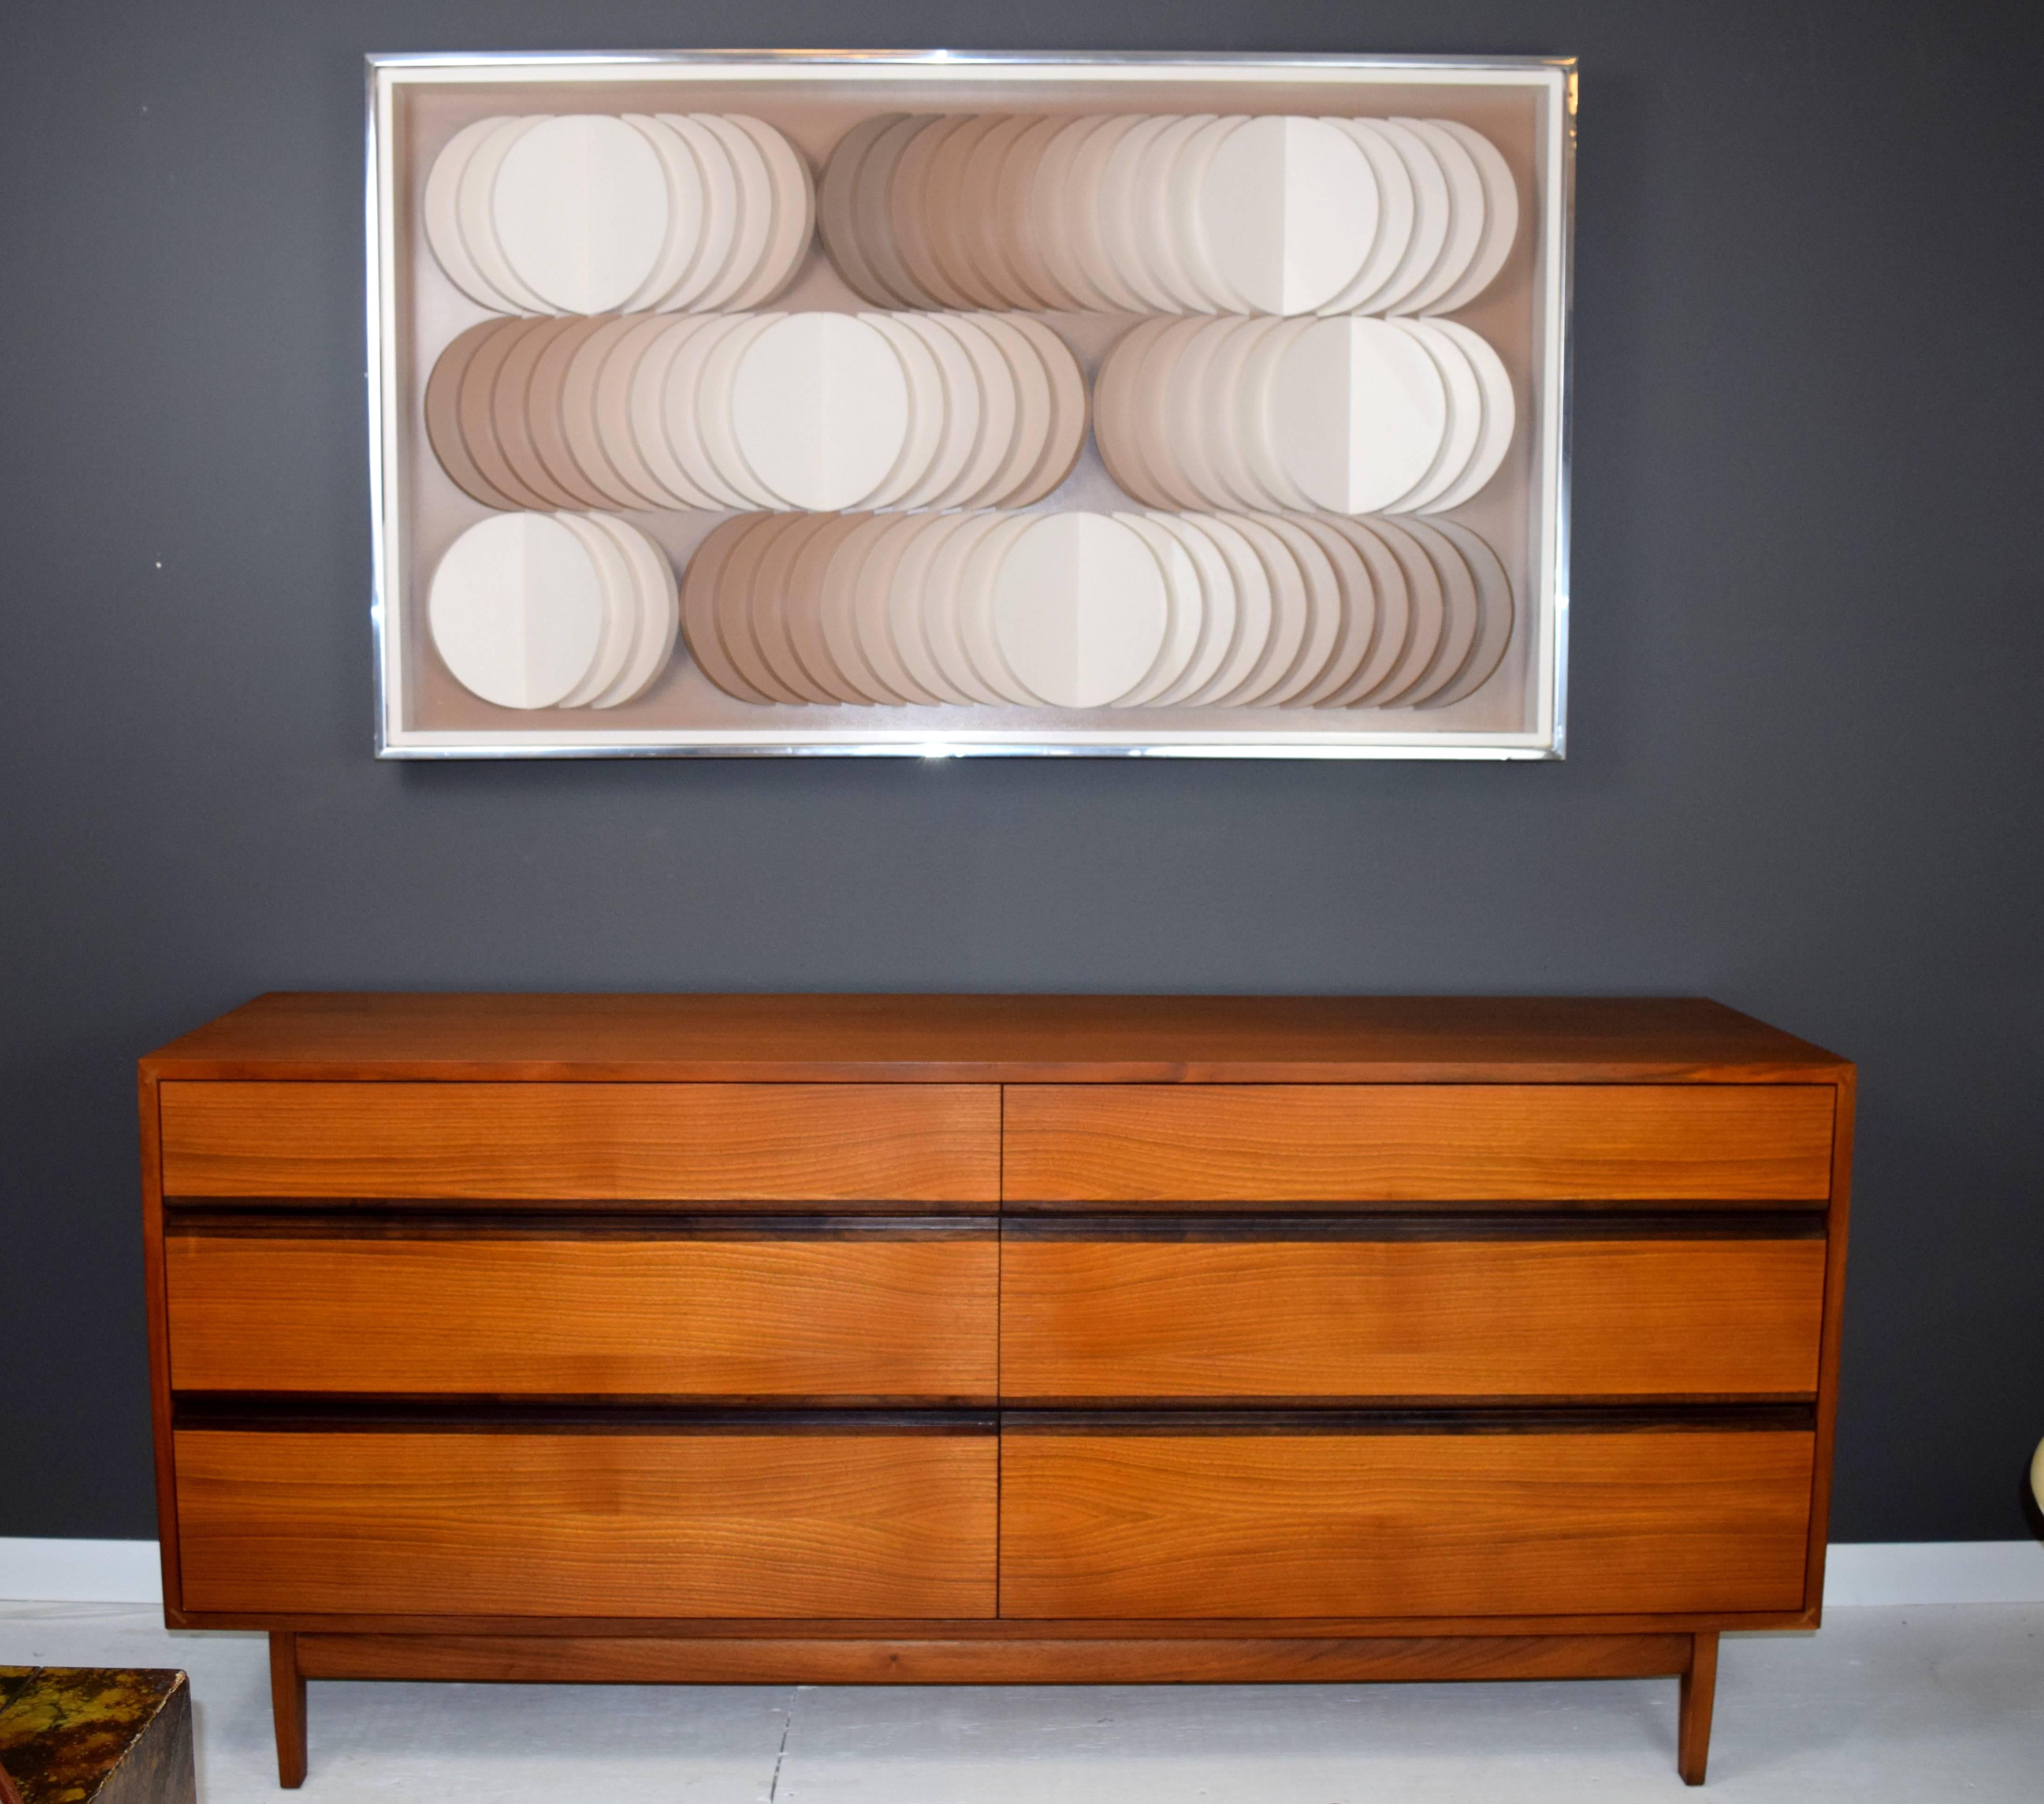 Exhilarating piece by Stephen L Winer comprised of semi circular disks radiating from varied central points. Gradation from light cream to milk chocolate gives art a sense of movement and op-art quality. Framed in deep shadow box painted in matching